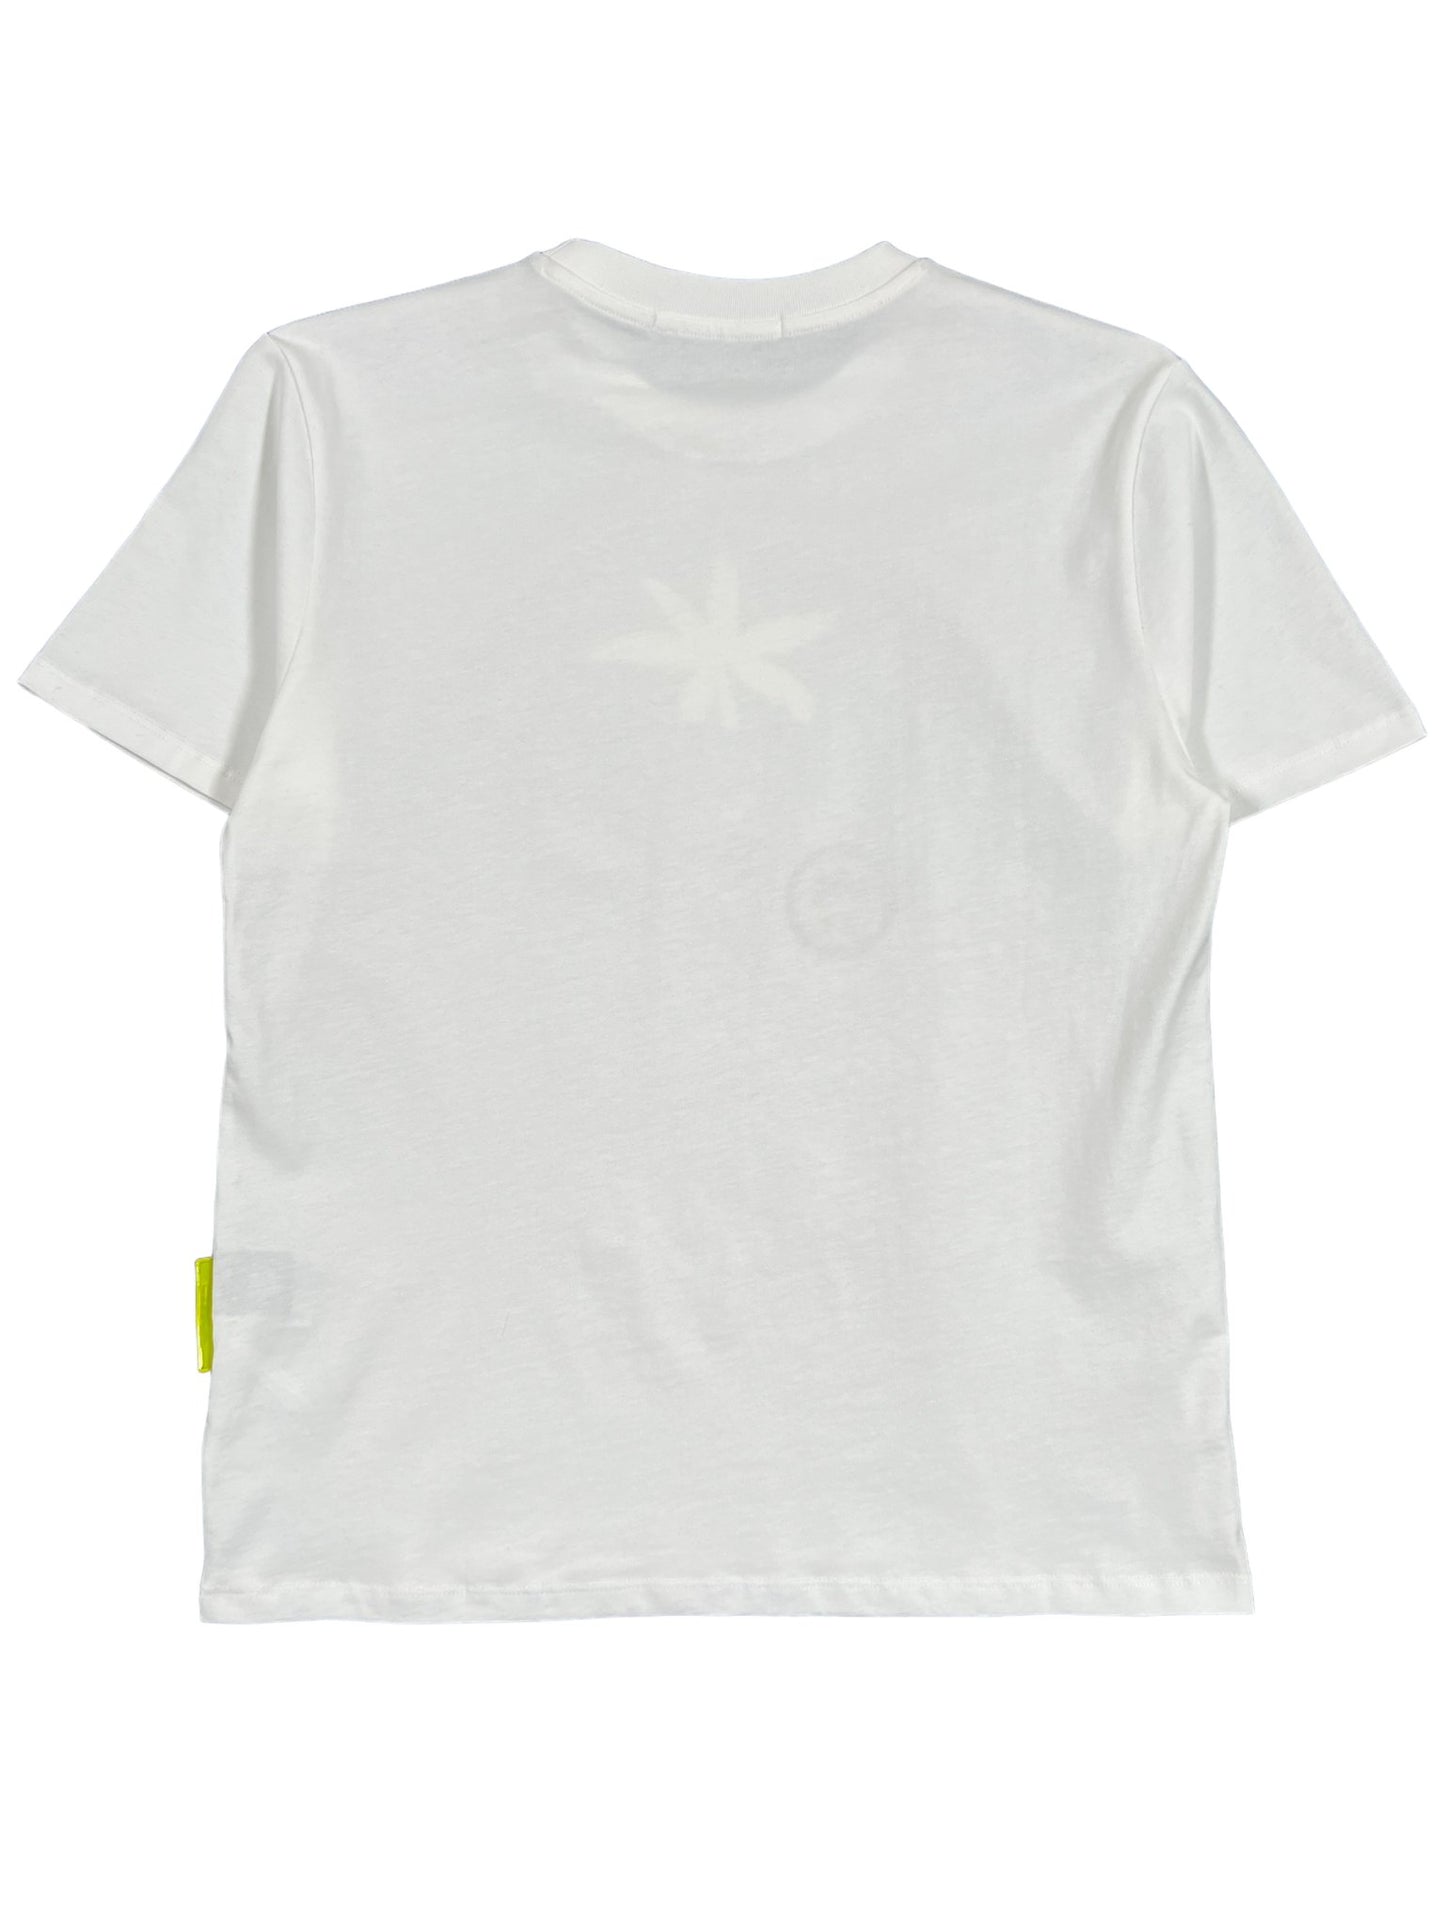 BARROW S4BWUATH036 JERSEY T-SHIRT UNISEX with a single star design in the center, Made In Italy.